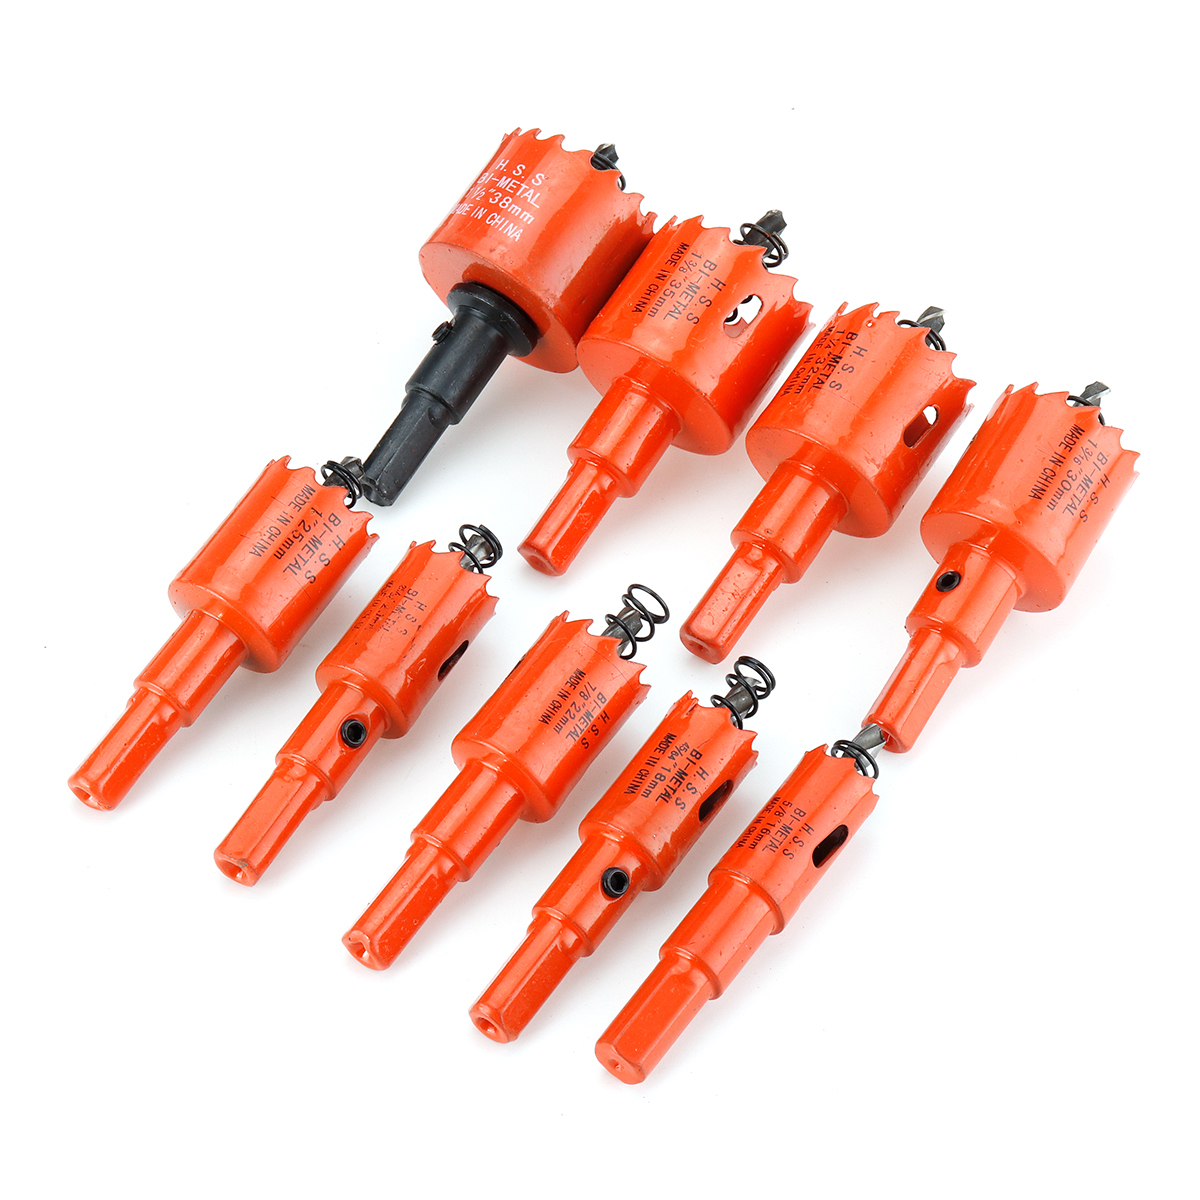 

9Pcs Tooth Hole Saw Cutter Kit HSS Steel Drill Bit Set Cutter Tool For Metal Wood Alloy